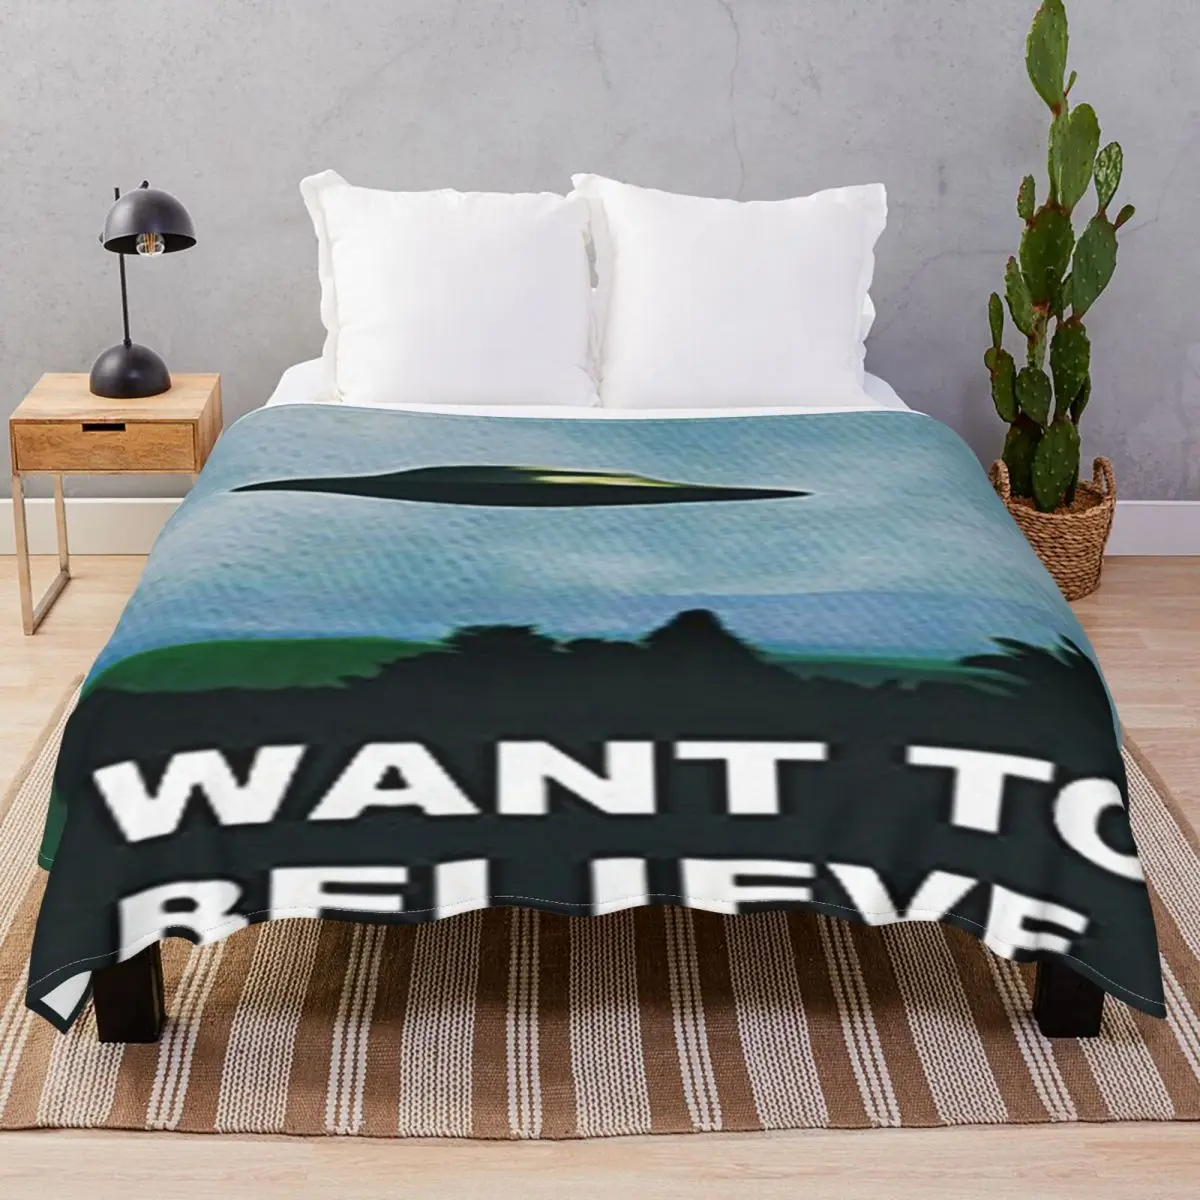 I Want To Believe Blankets Flannel Plush Print Super Warm Throw Blanket for Bed Sofa Travel Cinema